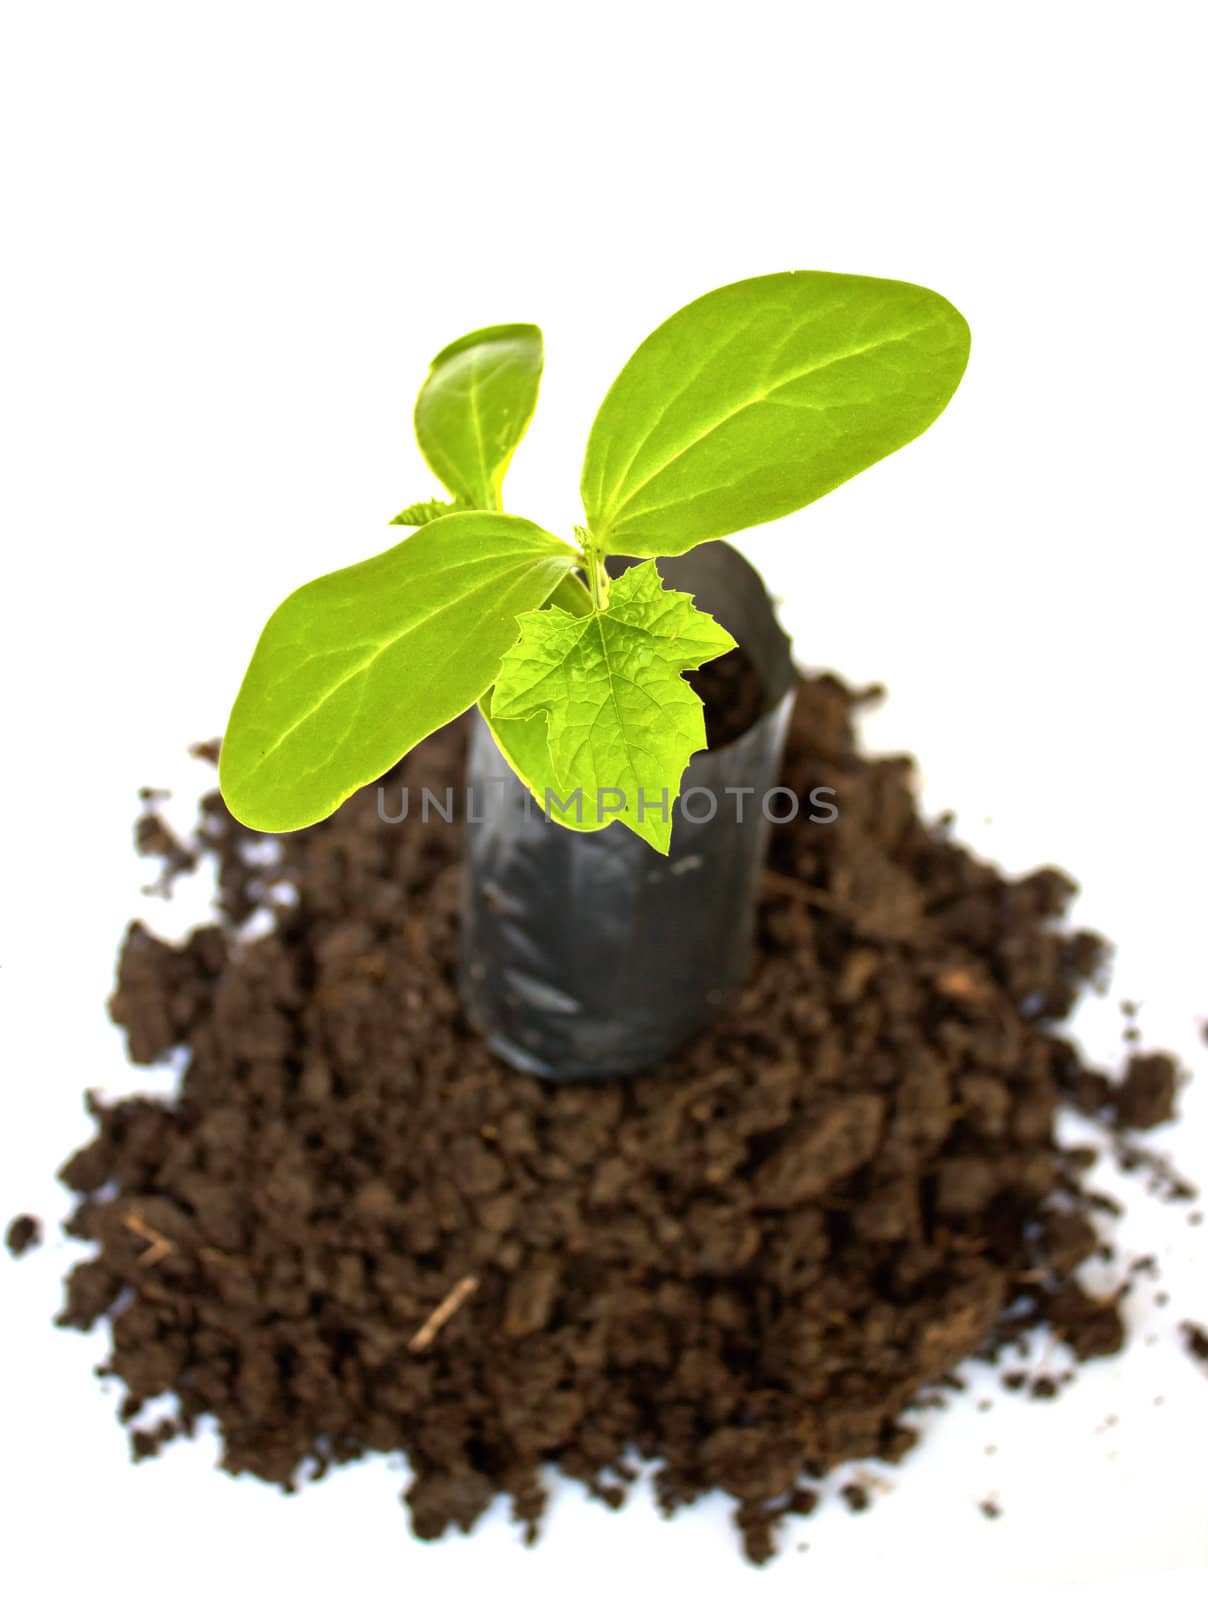 Young plant in Planting bag on  soil over white  by kurapy